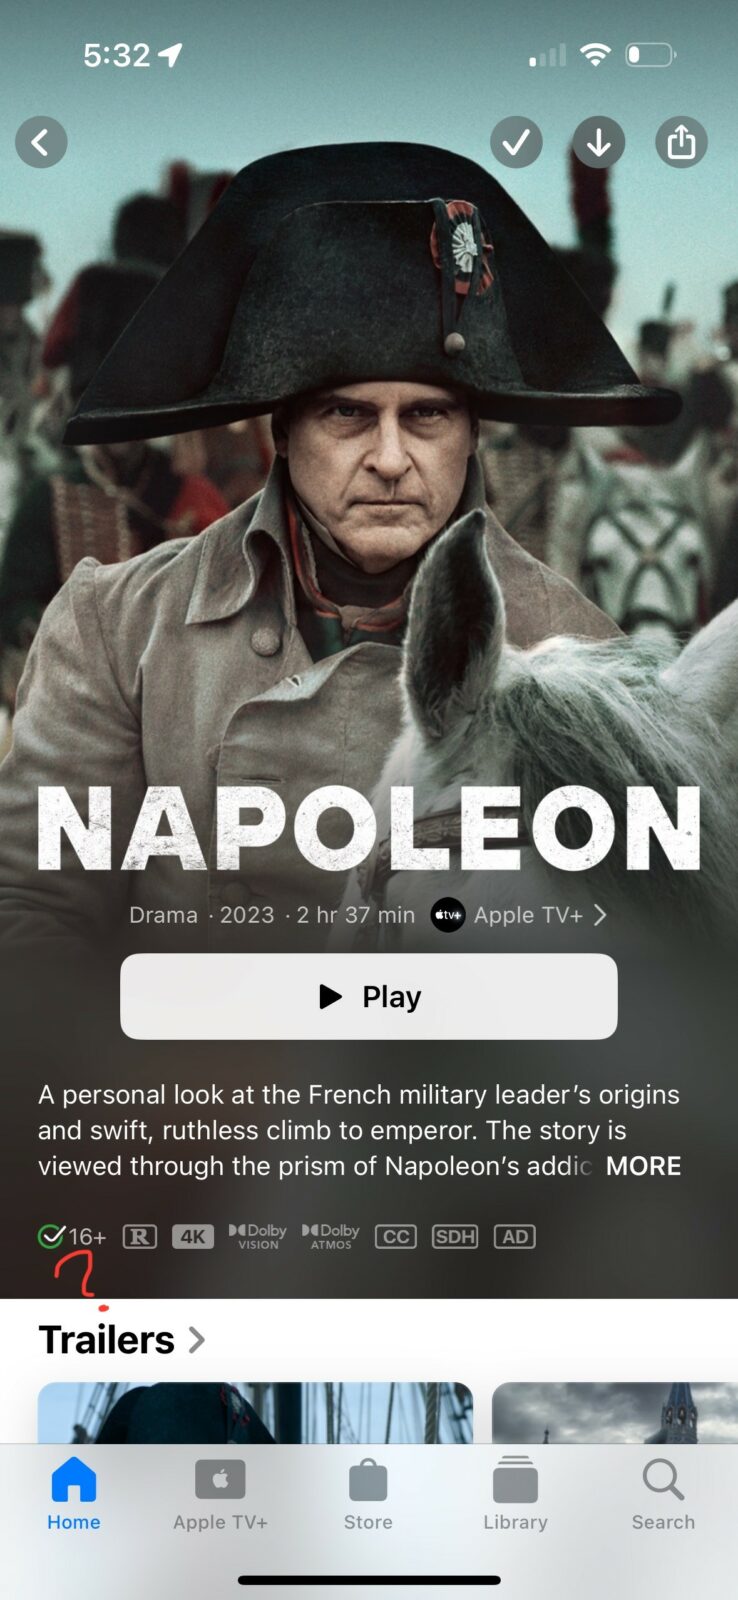 Screenshot of the page for the Apple TV+ original movie “Napoleon” in the Apple TV app, with a hand-annotated question mark where a Rotten Tomatoes score would go, but is absent.